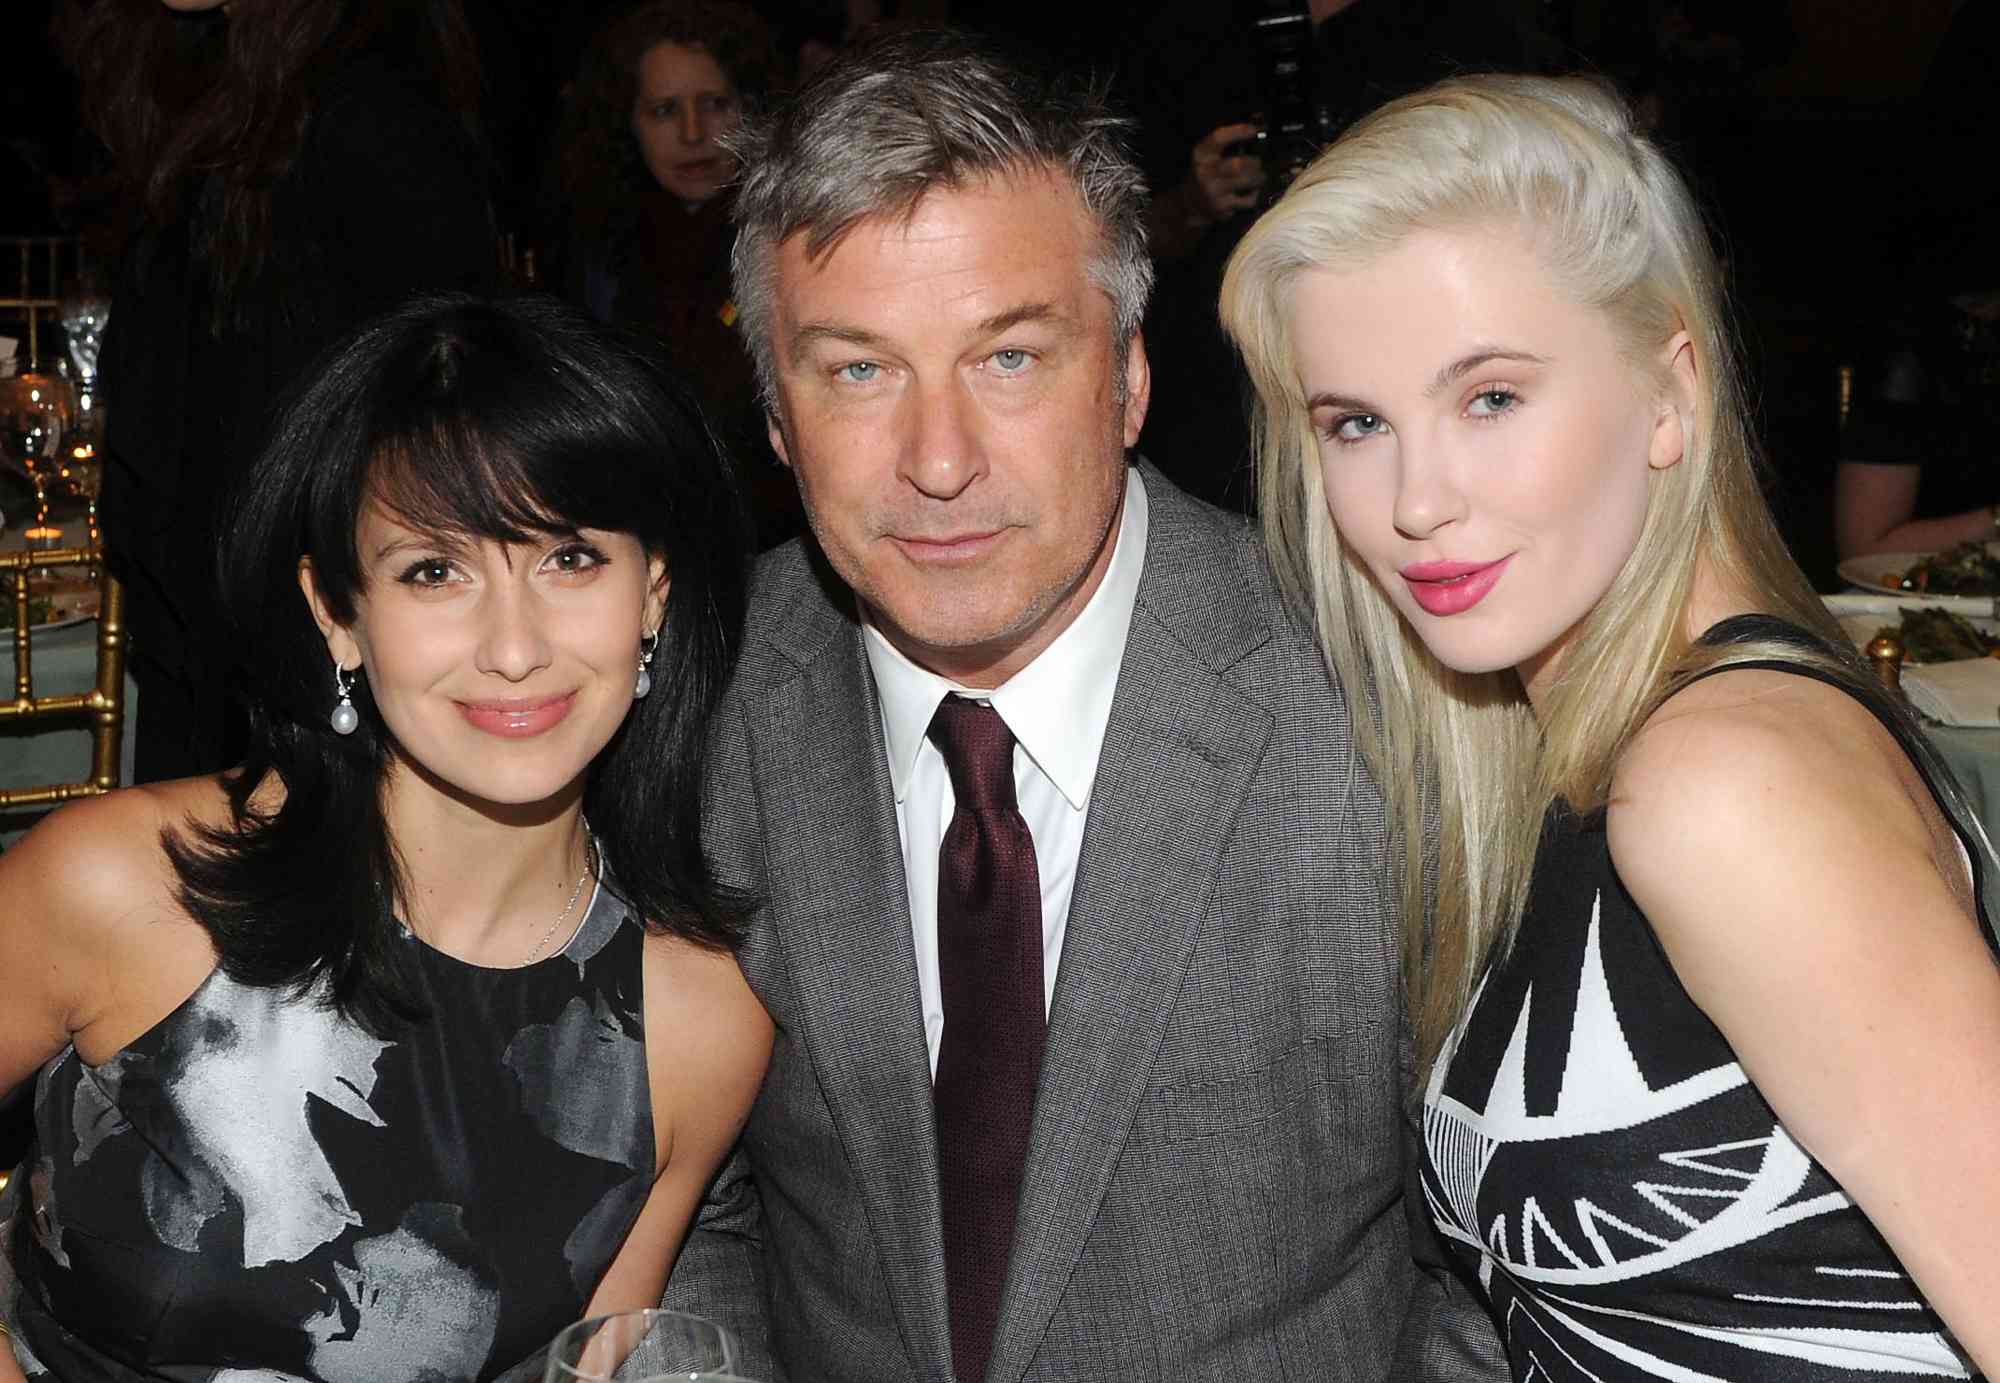 Hilaria Baldwin, actor Alec Baldwin, and model Ireland Baldwin attend the 5th annual Inspire! gala hosted by Bent On Learning on January 29, 2014 in New York City